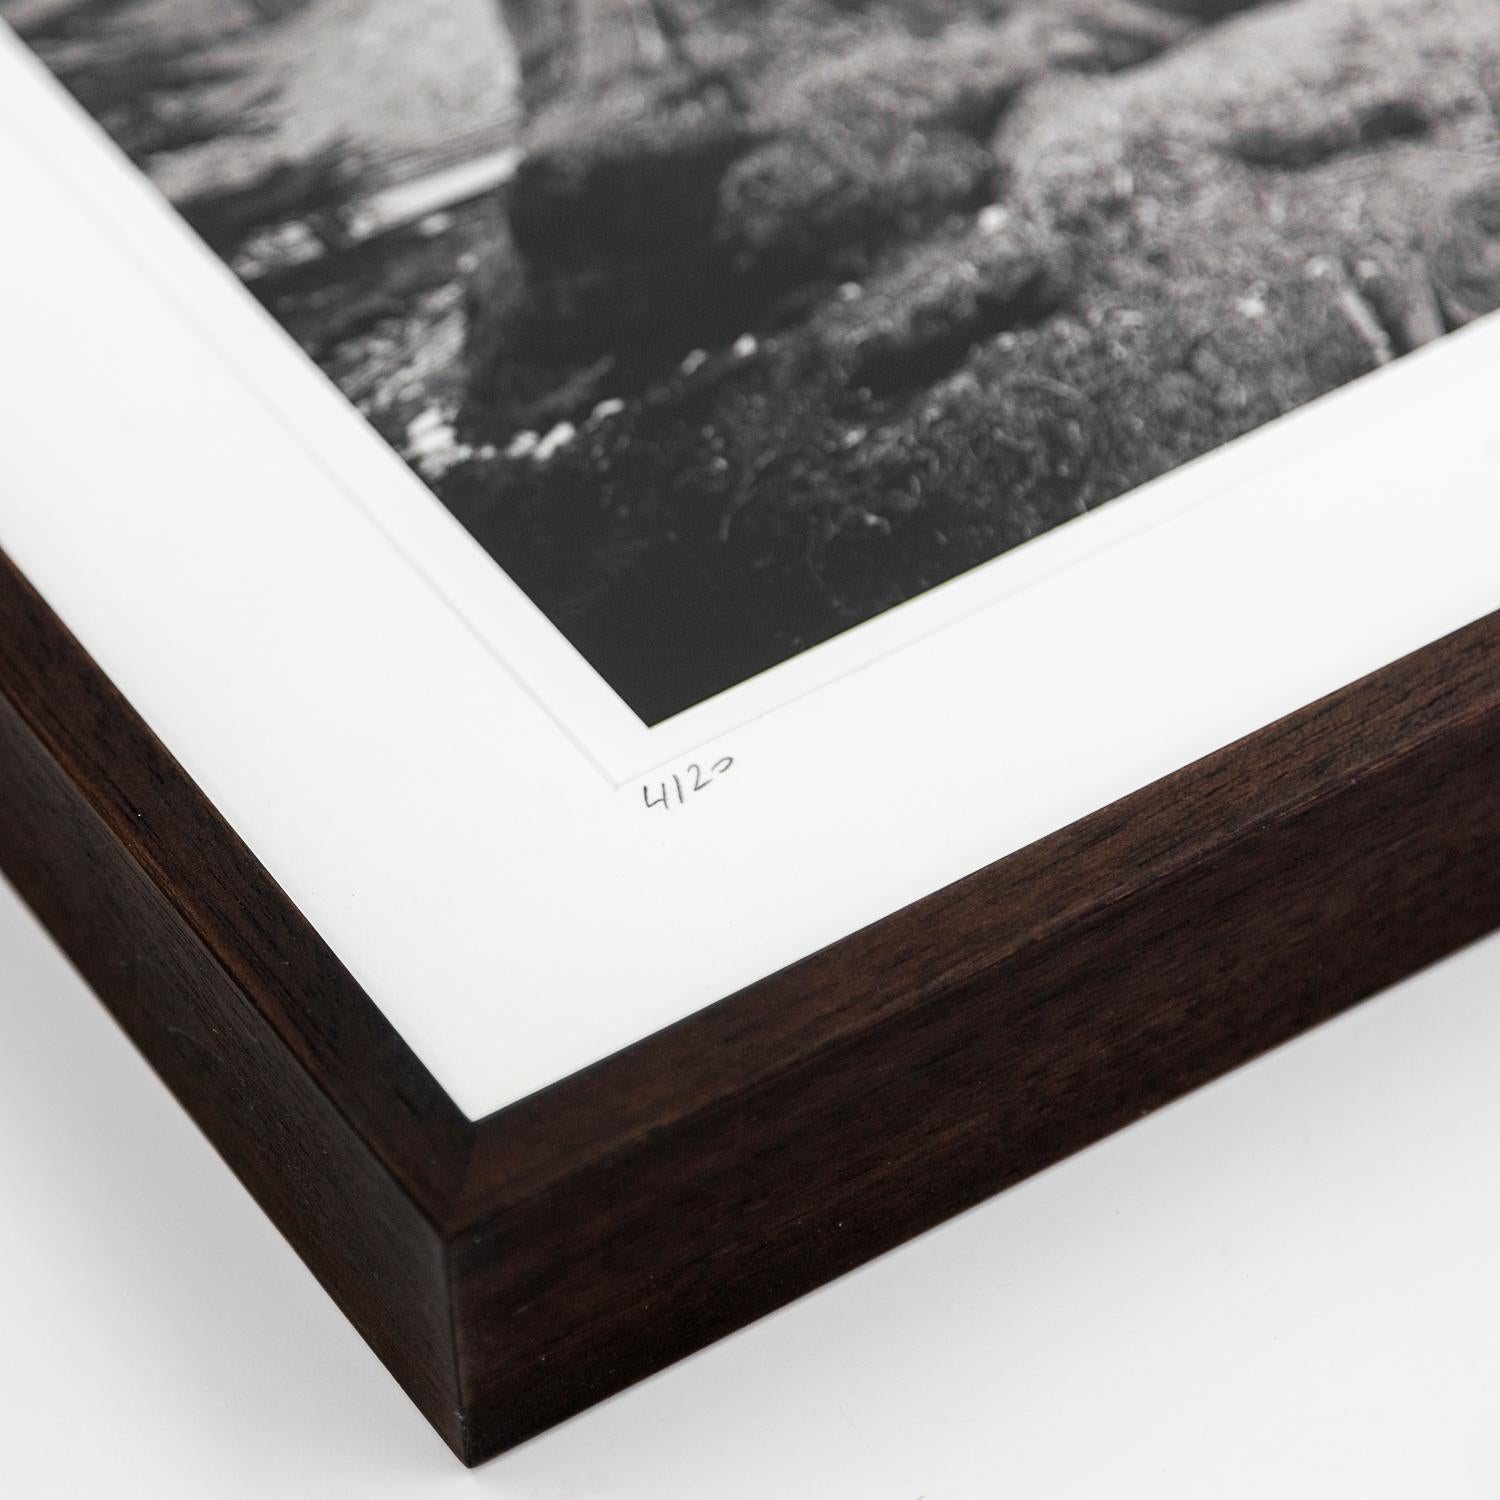 Gerald Berghammer - Limited Edition 4/20
Silver Gelatin Prints, Selenium Toned, Printed 2019
Signed, numbered, dated by Artis.
Handmade wood frame, dark-brown, natural white archival Passepartout, anti-reflection white glass, UV 70, metal corners